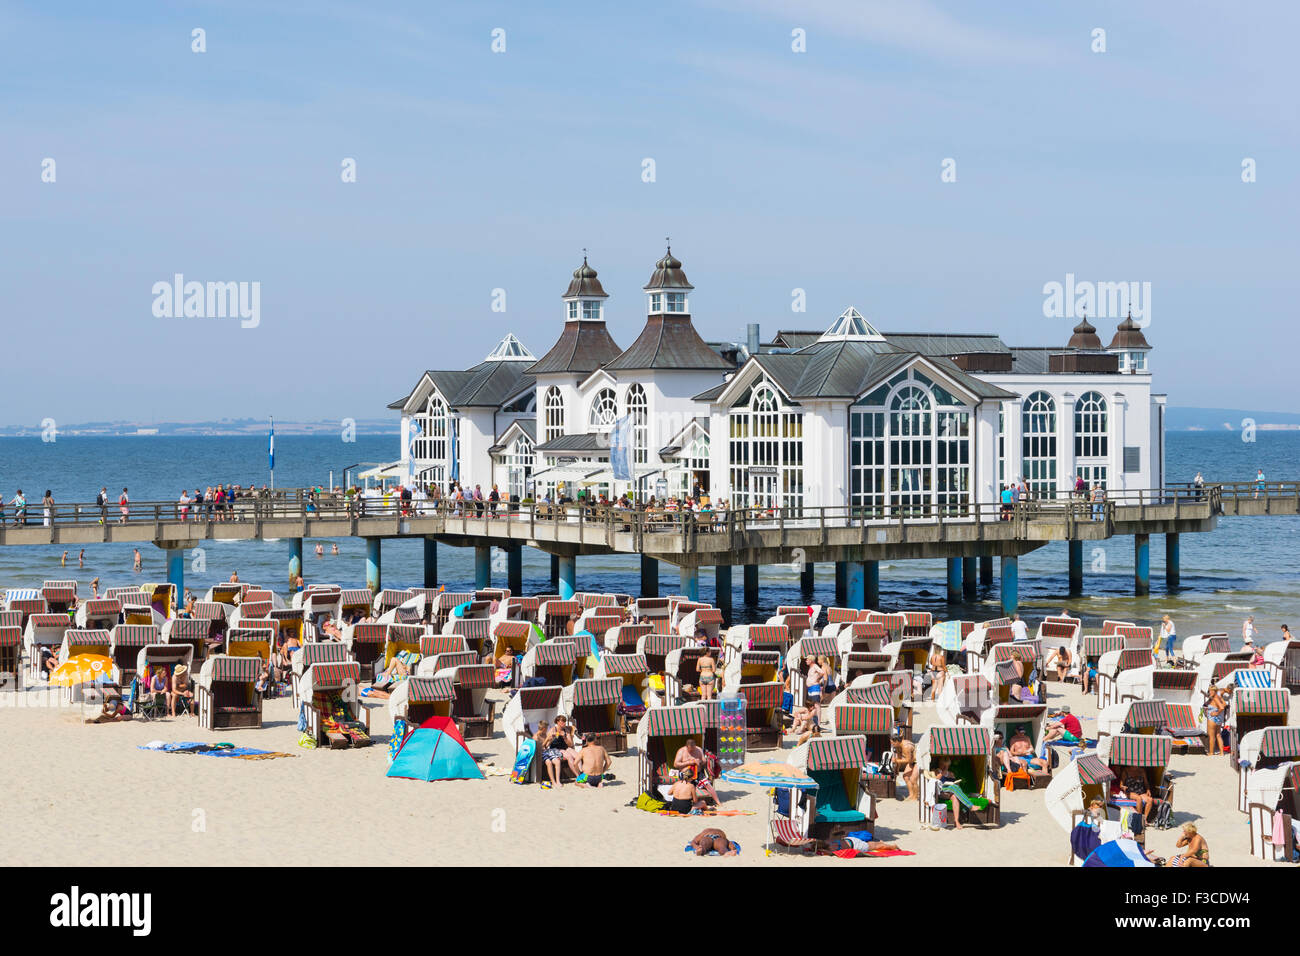 View of Pier and many traditional Strandkorb beach chairs on beach at Sellin resort on  Rugen Island , Germany Stock Photo